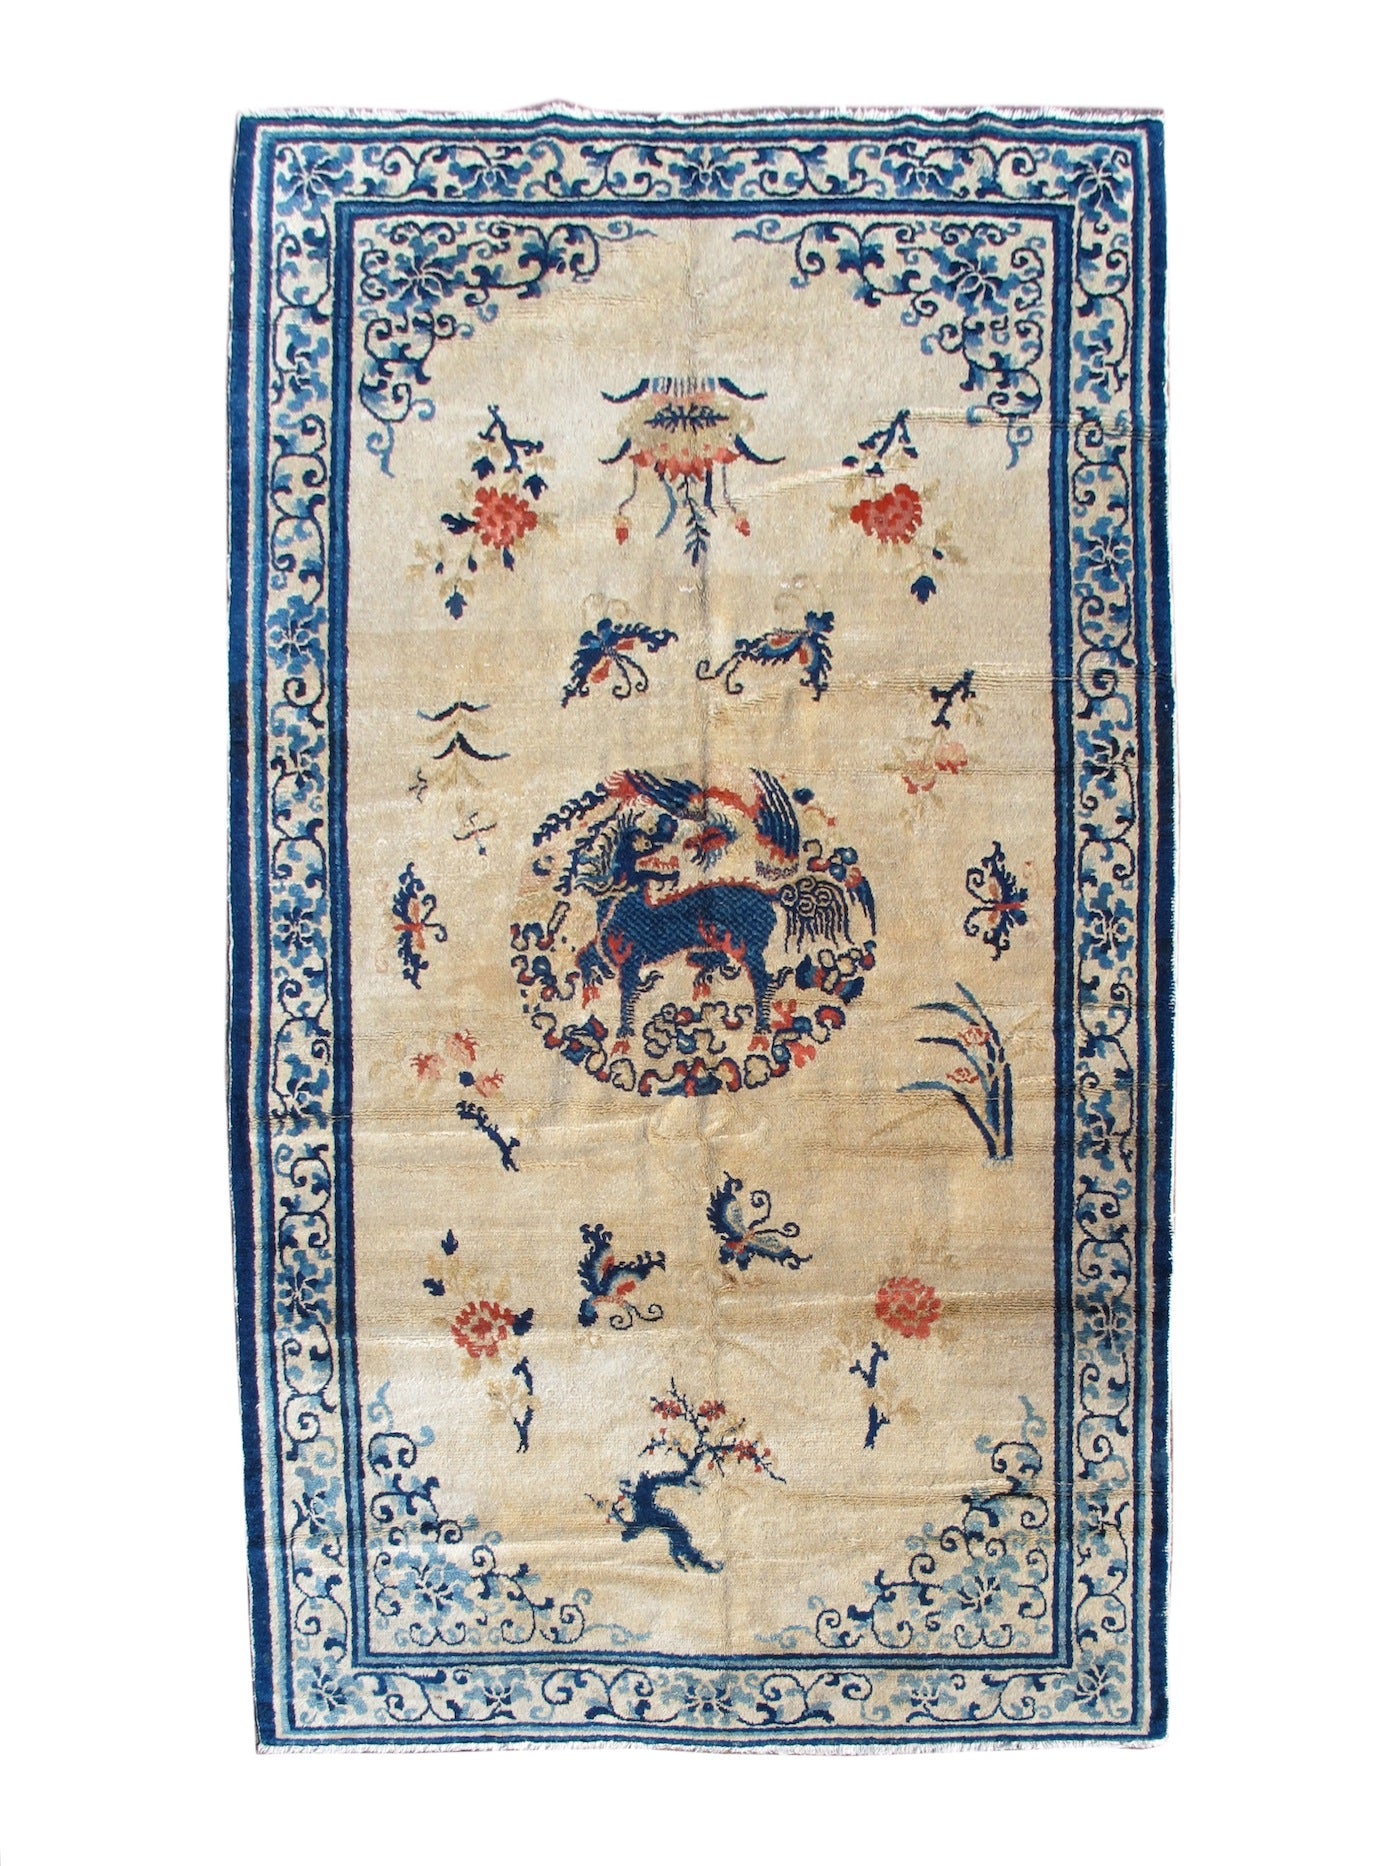 Mid 19th Century Ivory and Blue Ning Hsia Carpet